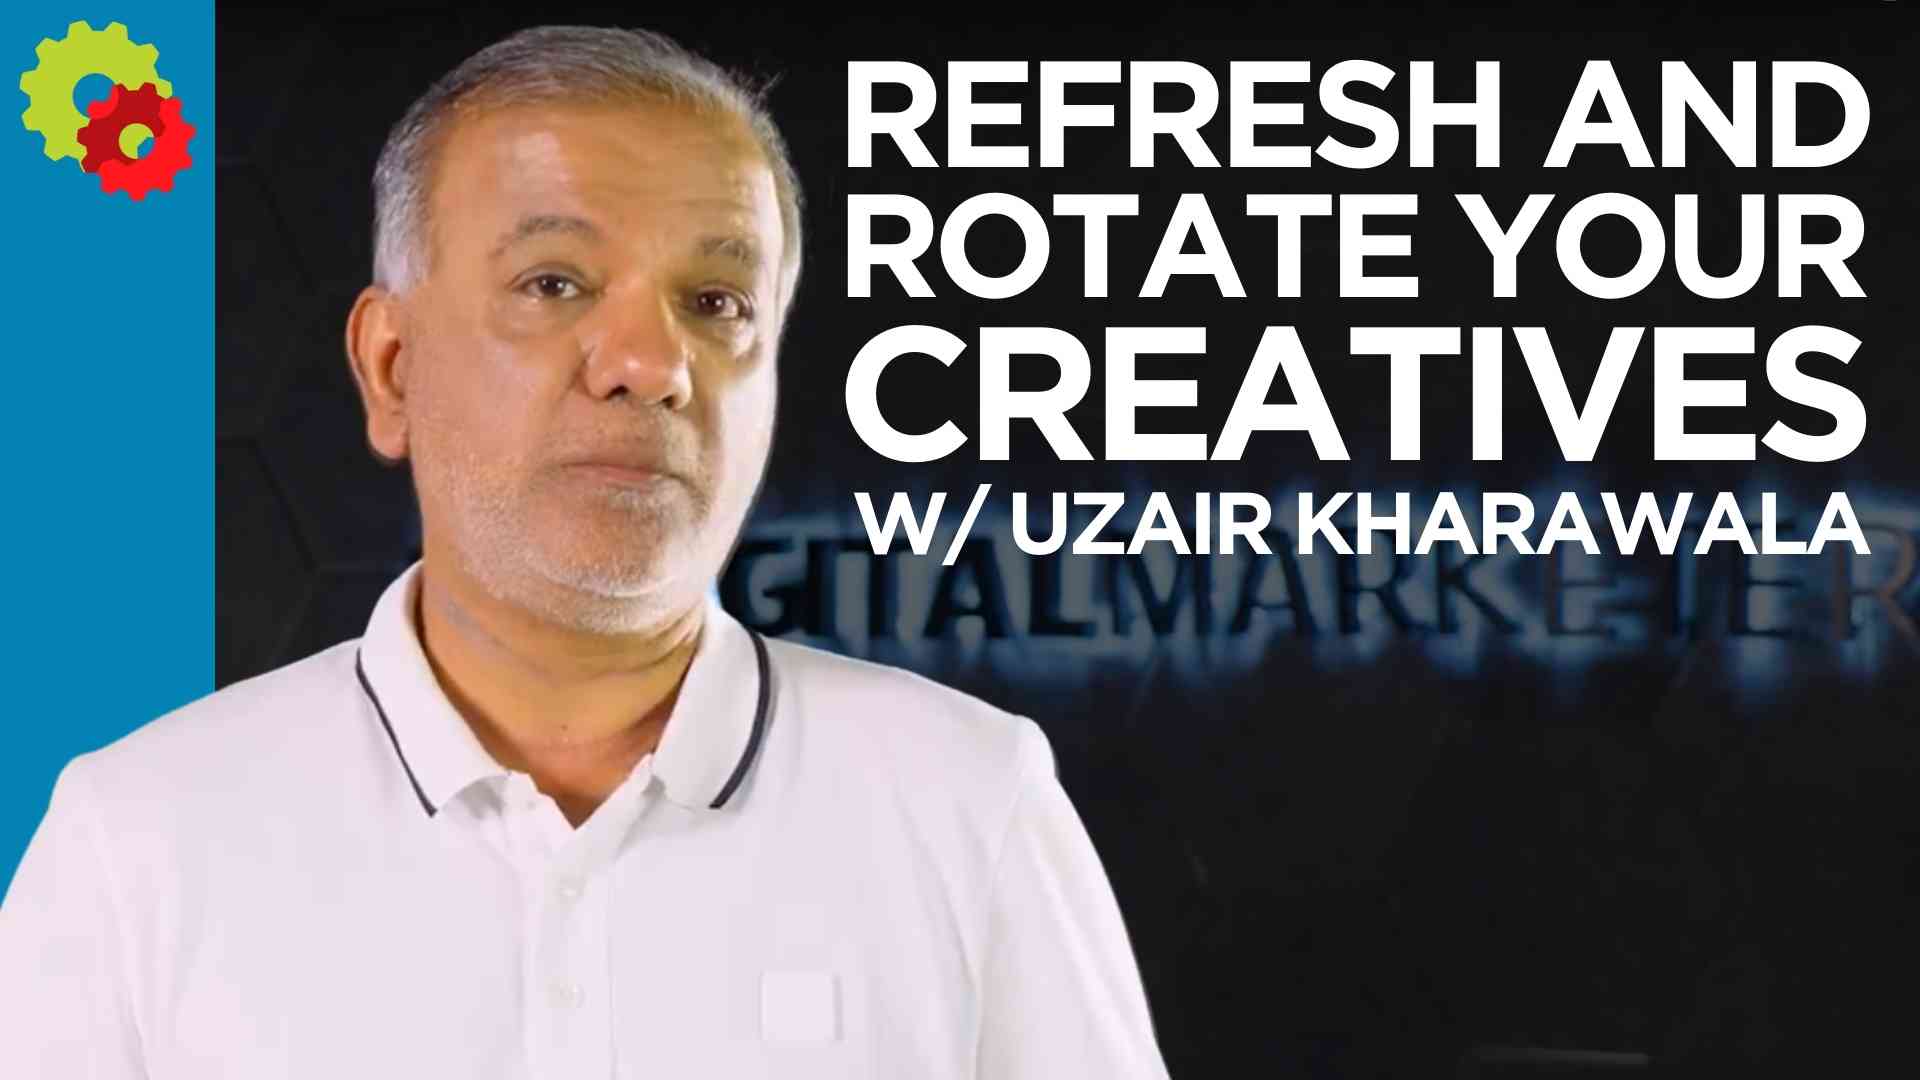 Refresh and Rotate Your Creatives with Uzair Kharawala [VIDEO]